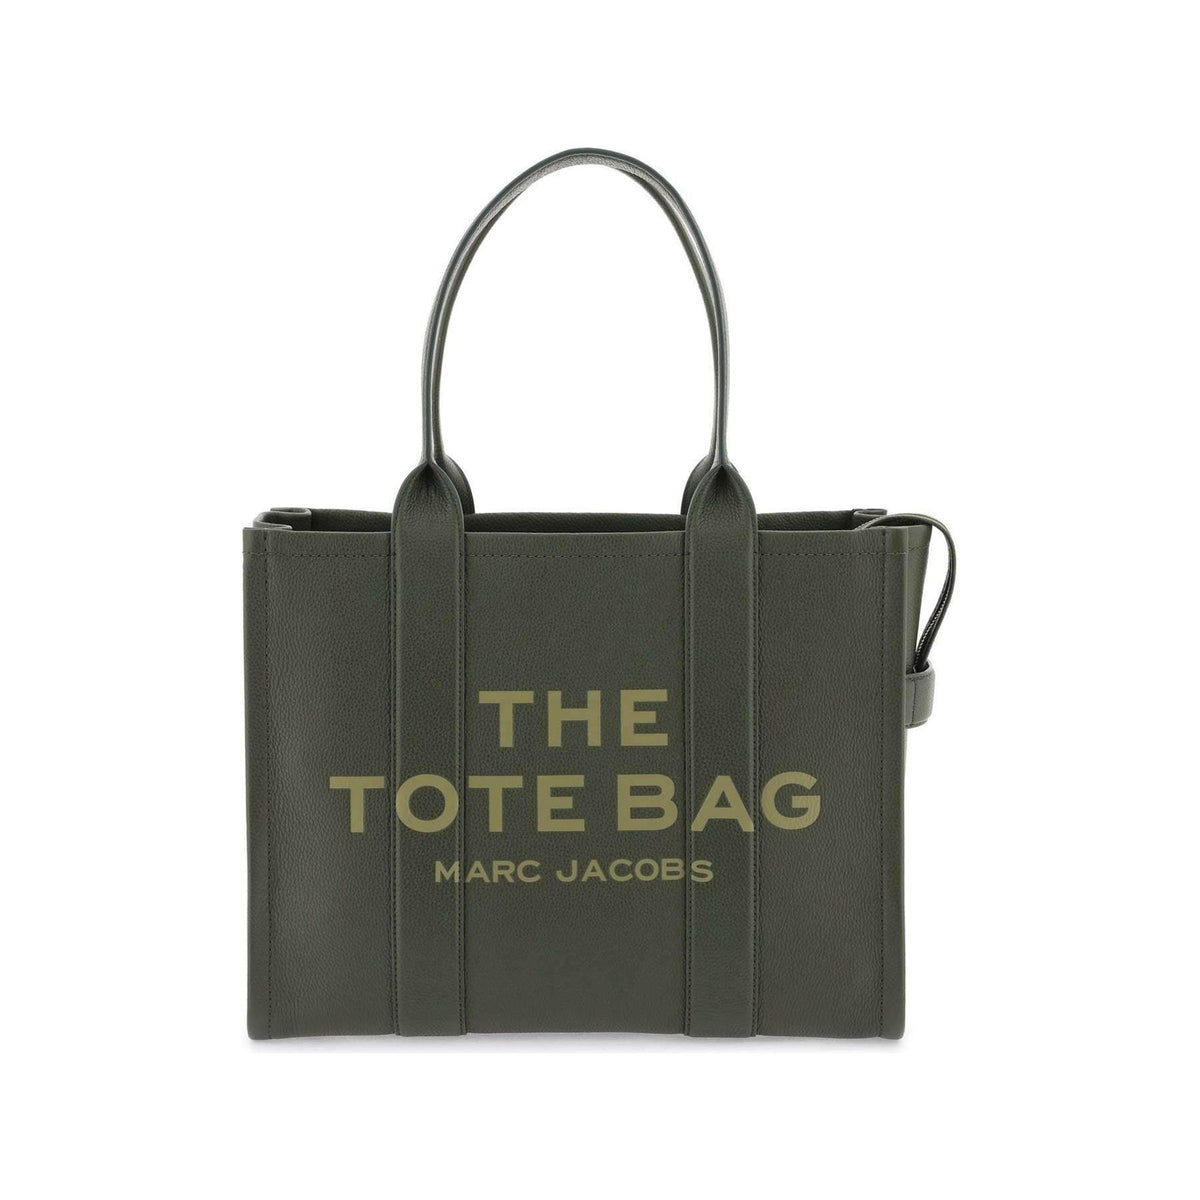 MARC JACOBS - Forest The Leather Large Tote Bag - JOHN JULIA